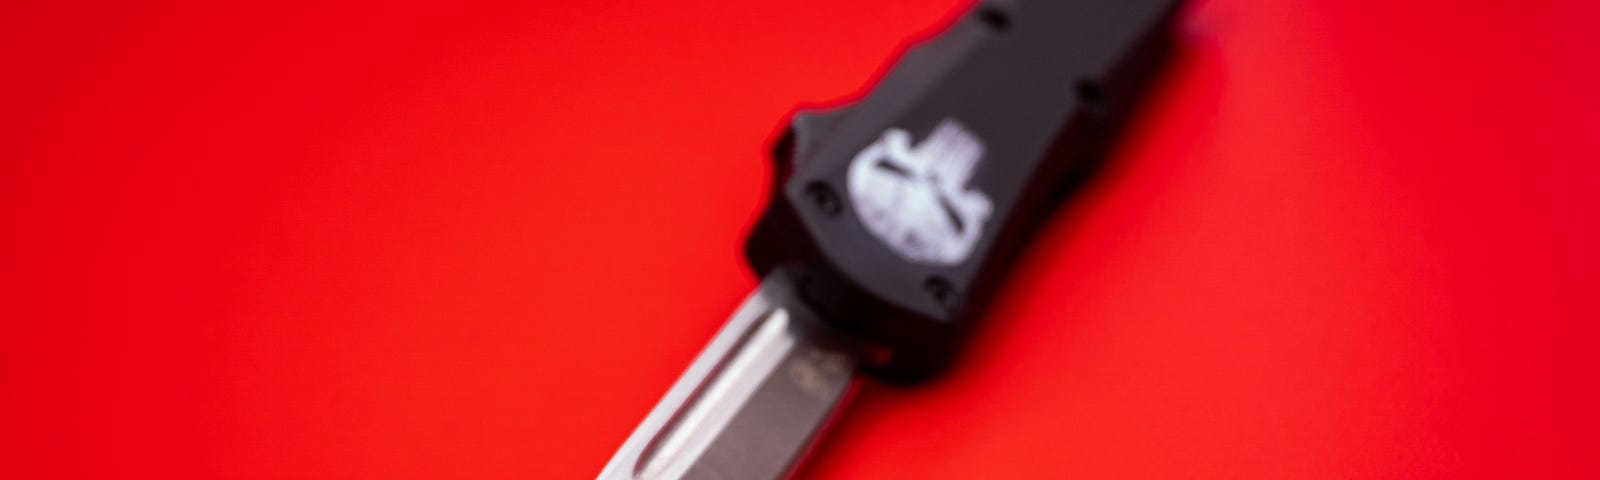 A knife with a skull on the hilt lies on a red background.